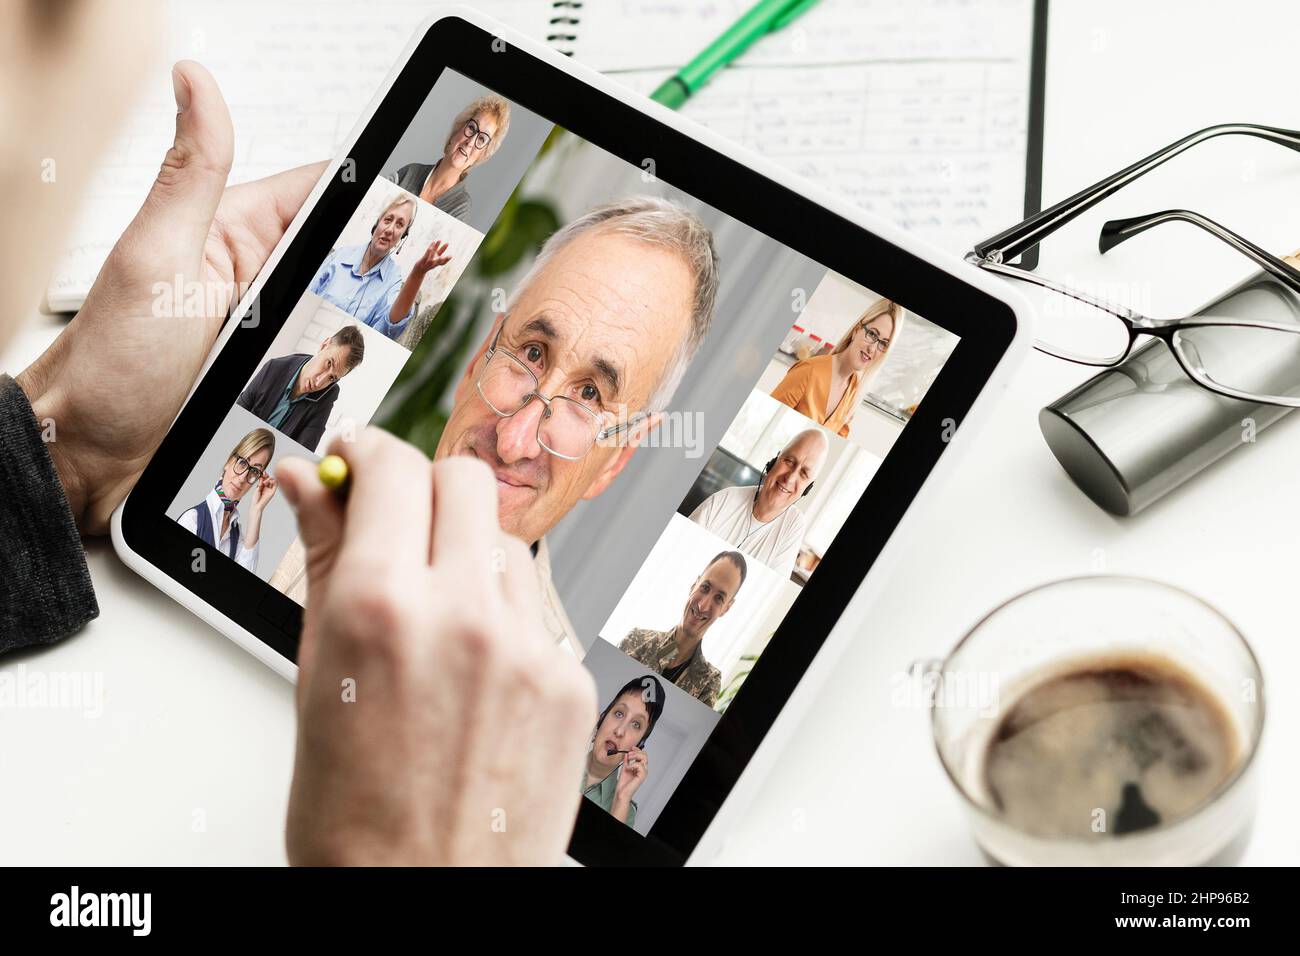 Closeup of a woman talking through video chat on tablet. communicating tablet in video chat through webcam. Stock Photo